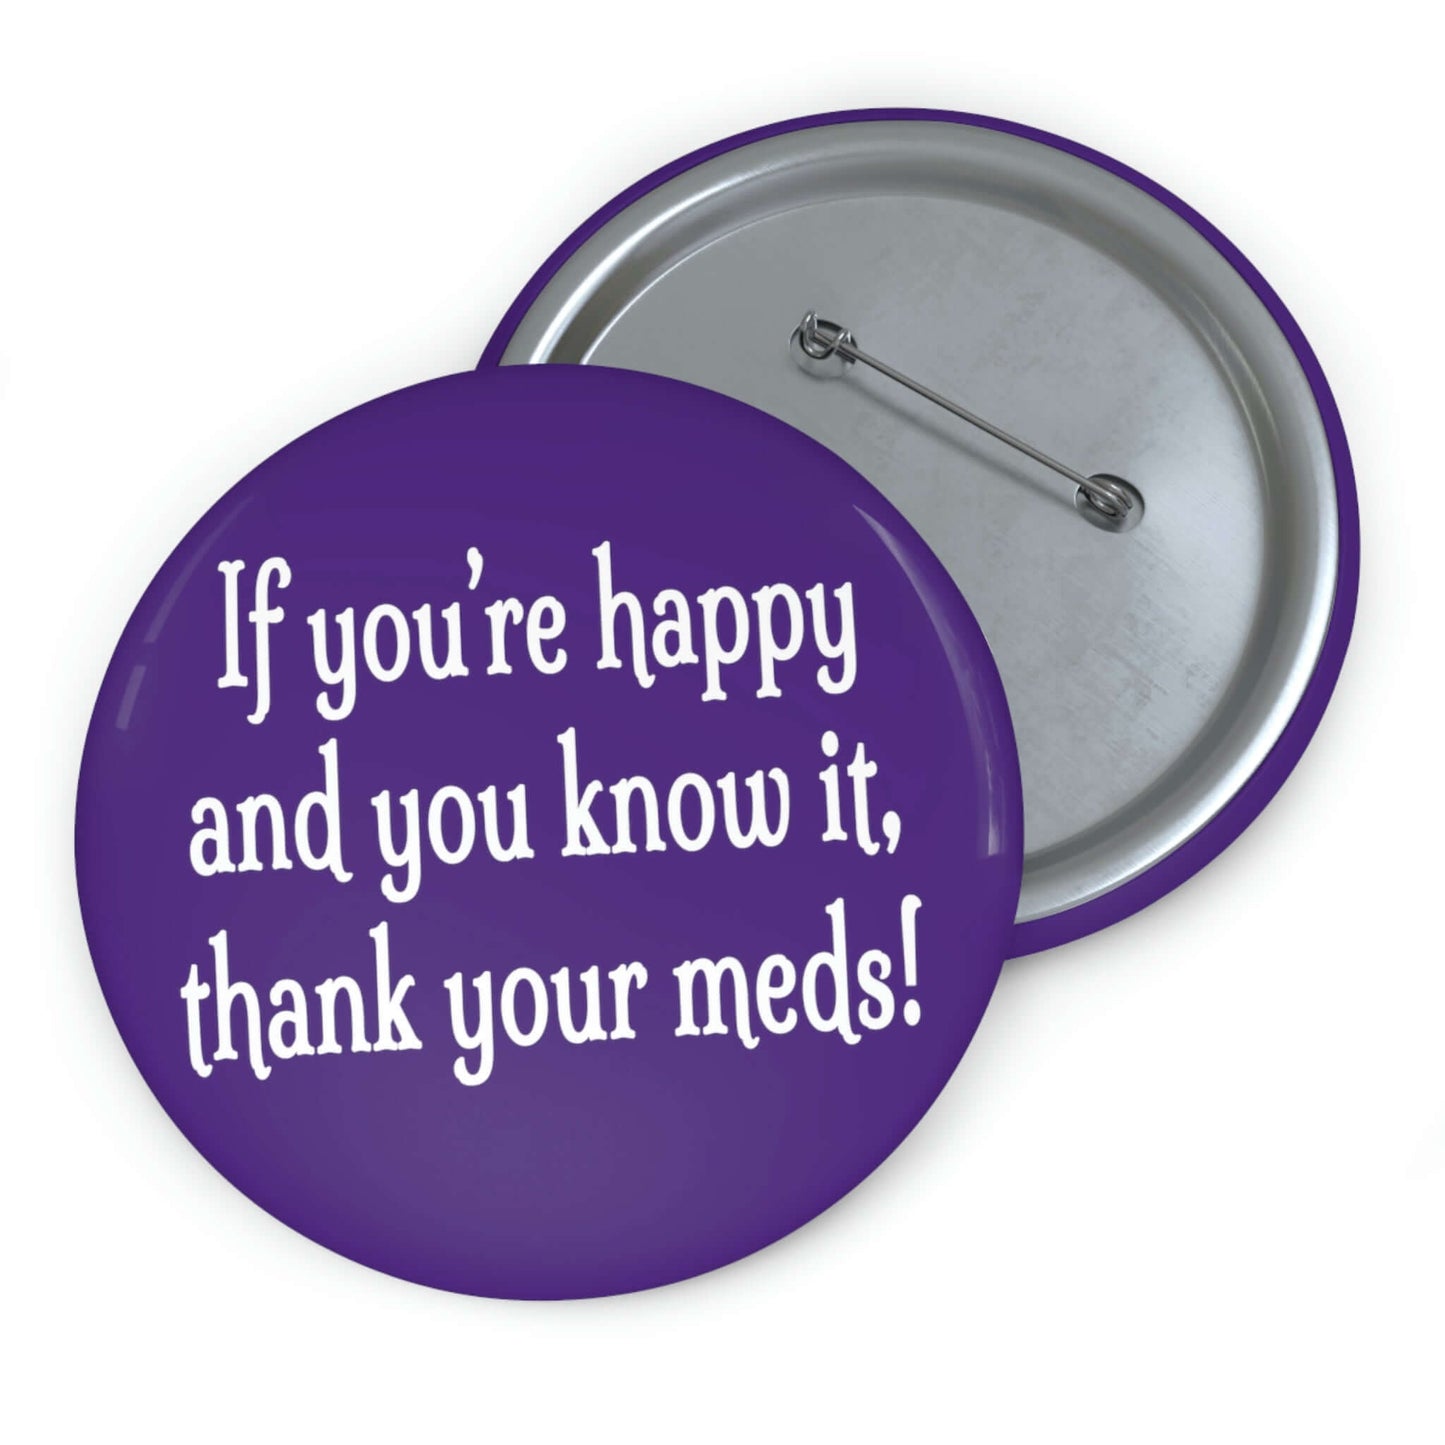 Thank your meds pinback button